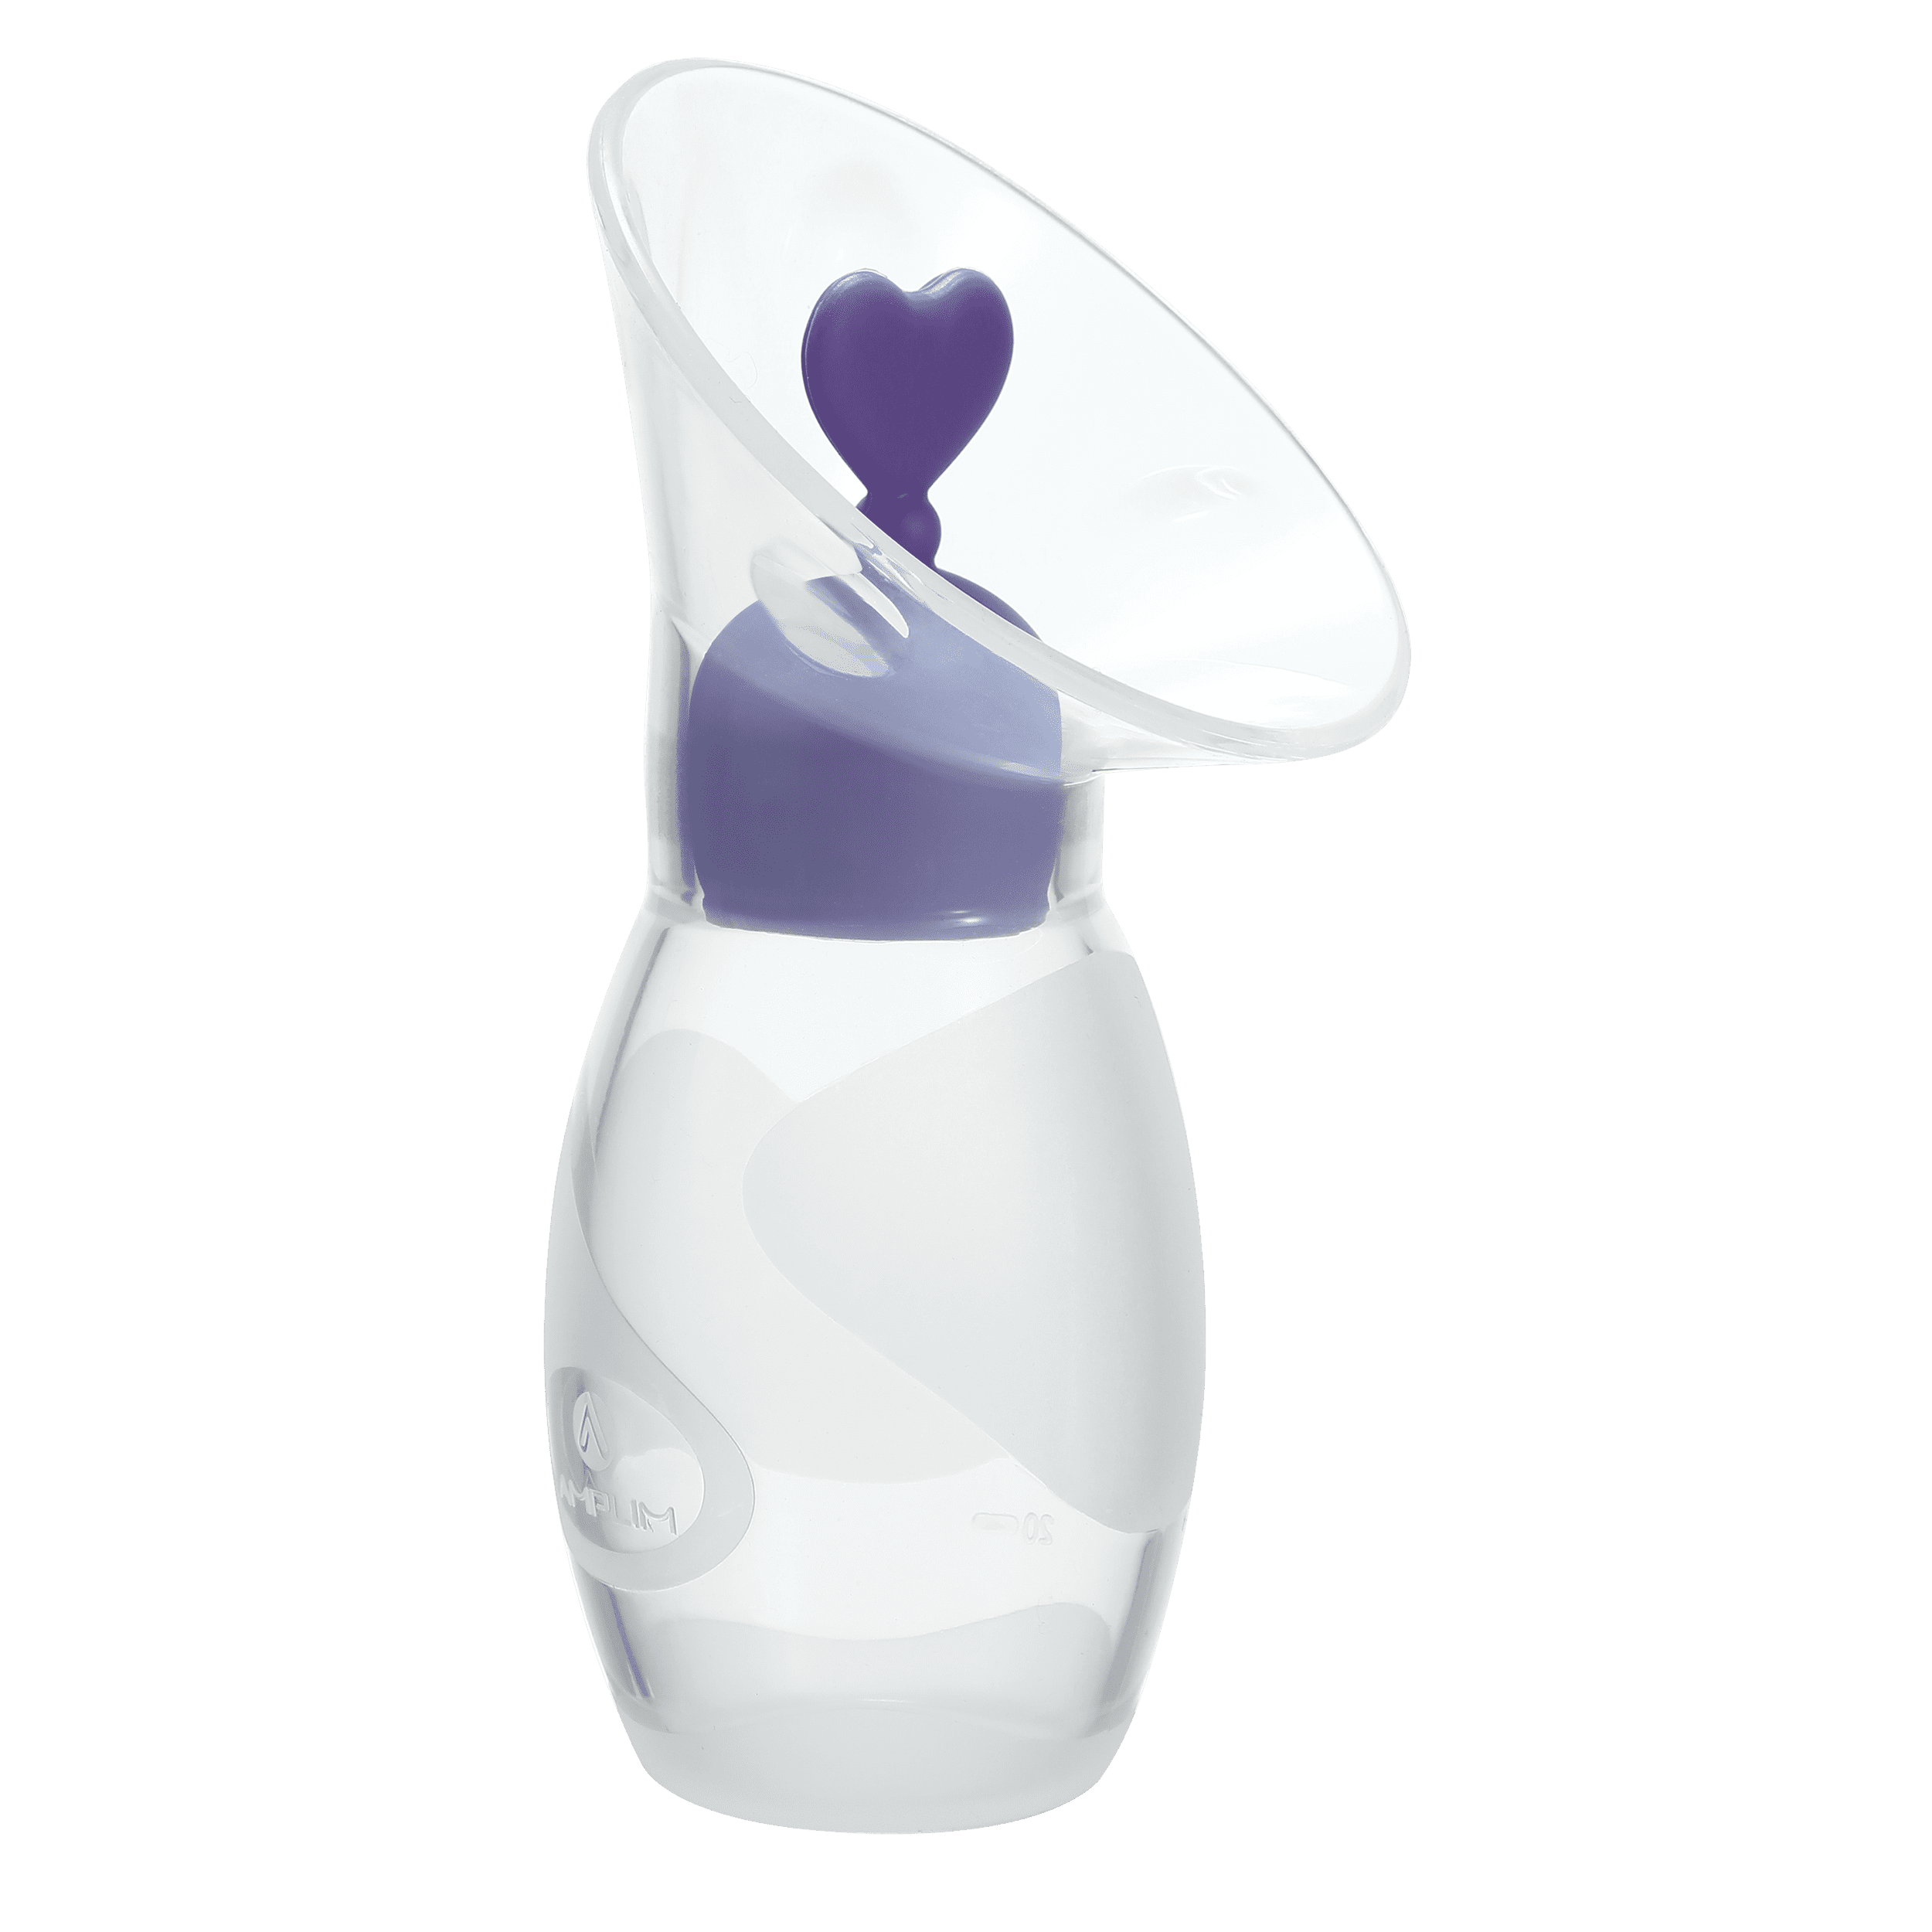 Breast Milk Catcher for Breastfeeding with Pumping Function︱4 oz